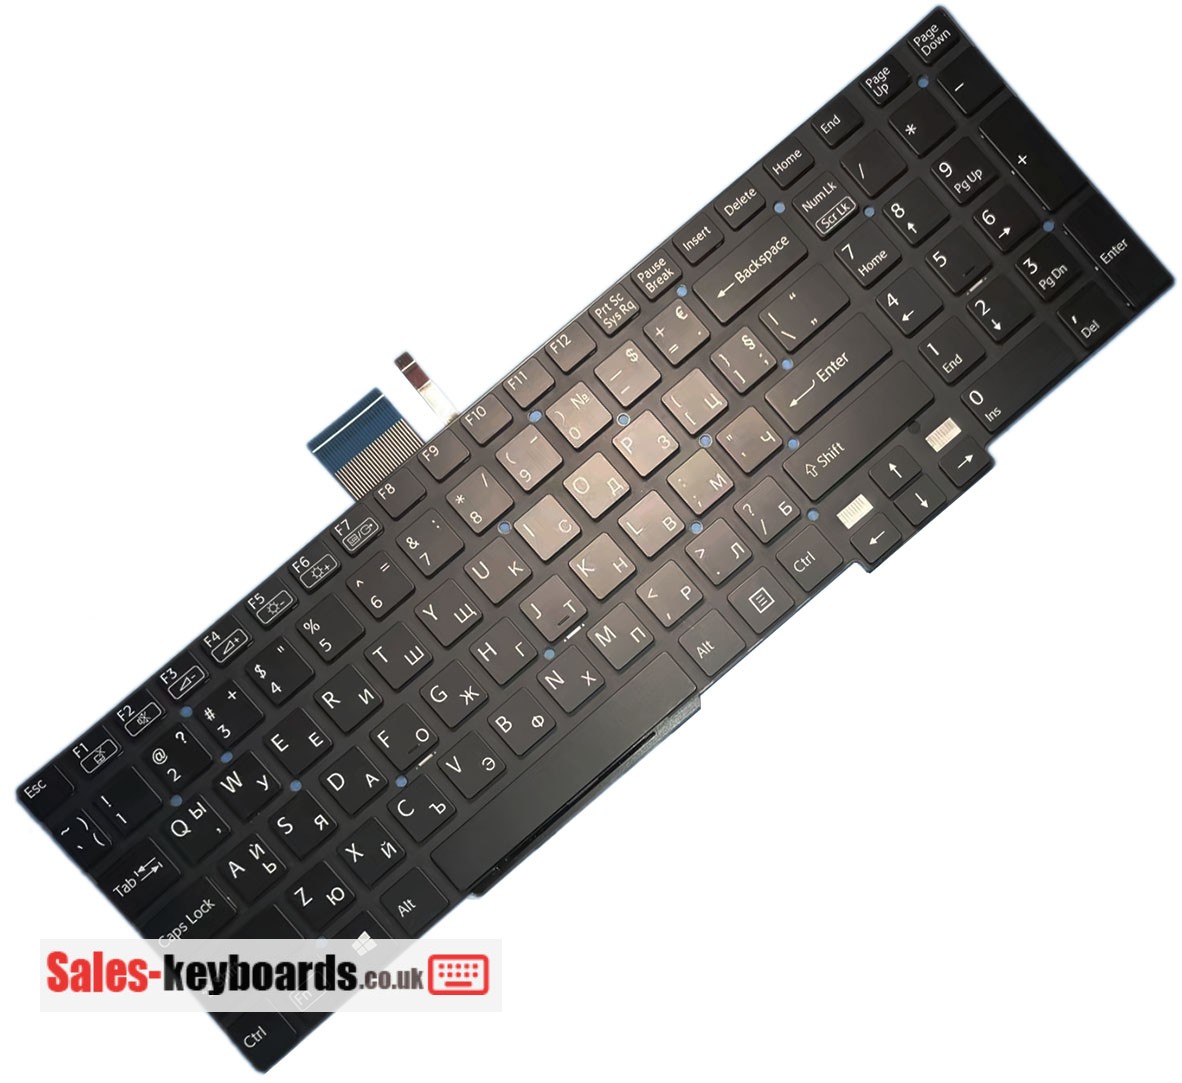 Sony VAIO SVT15112CXS Keyboard replacement